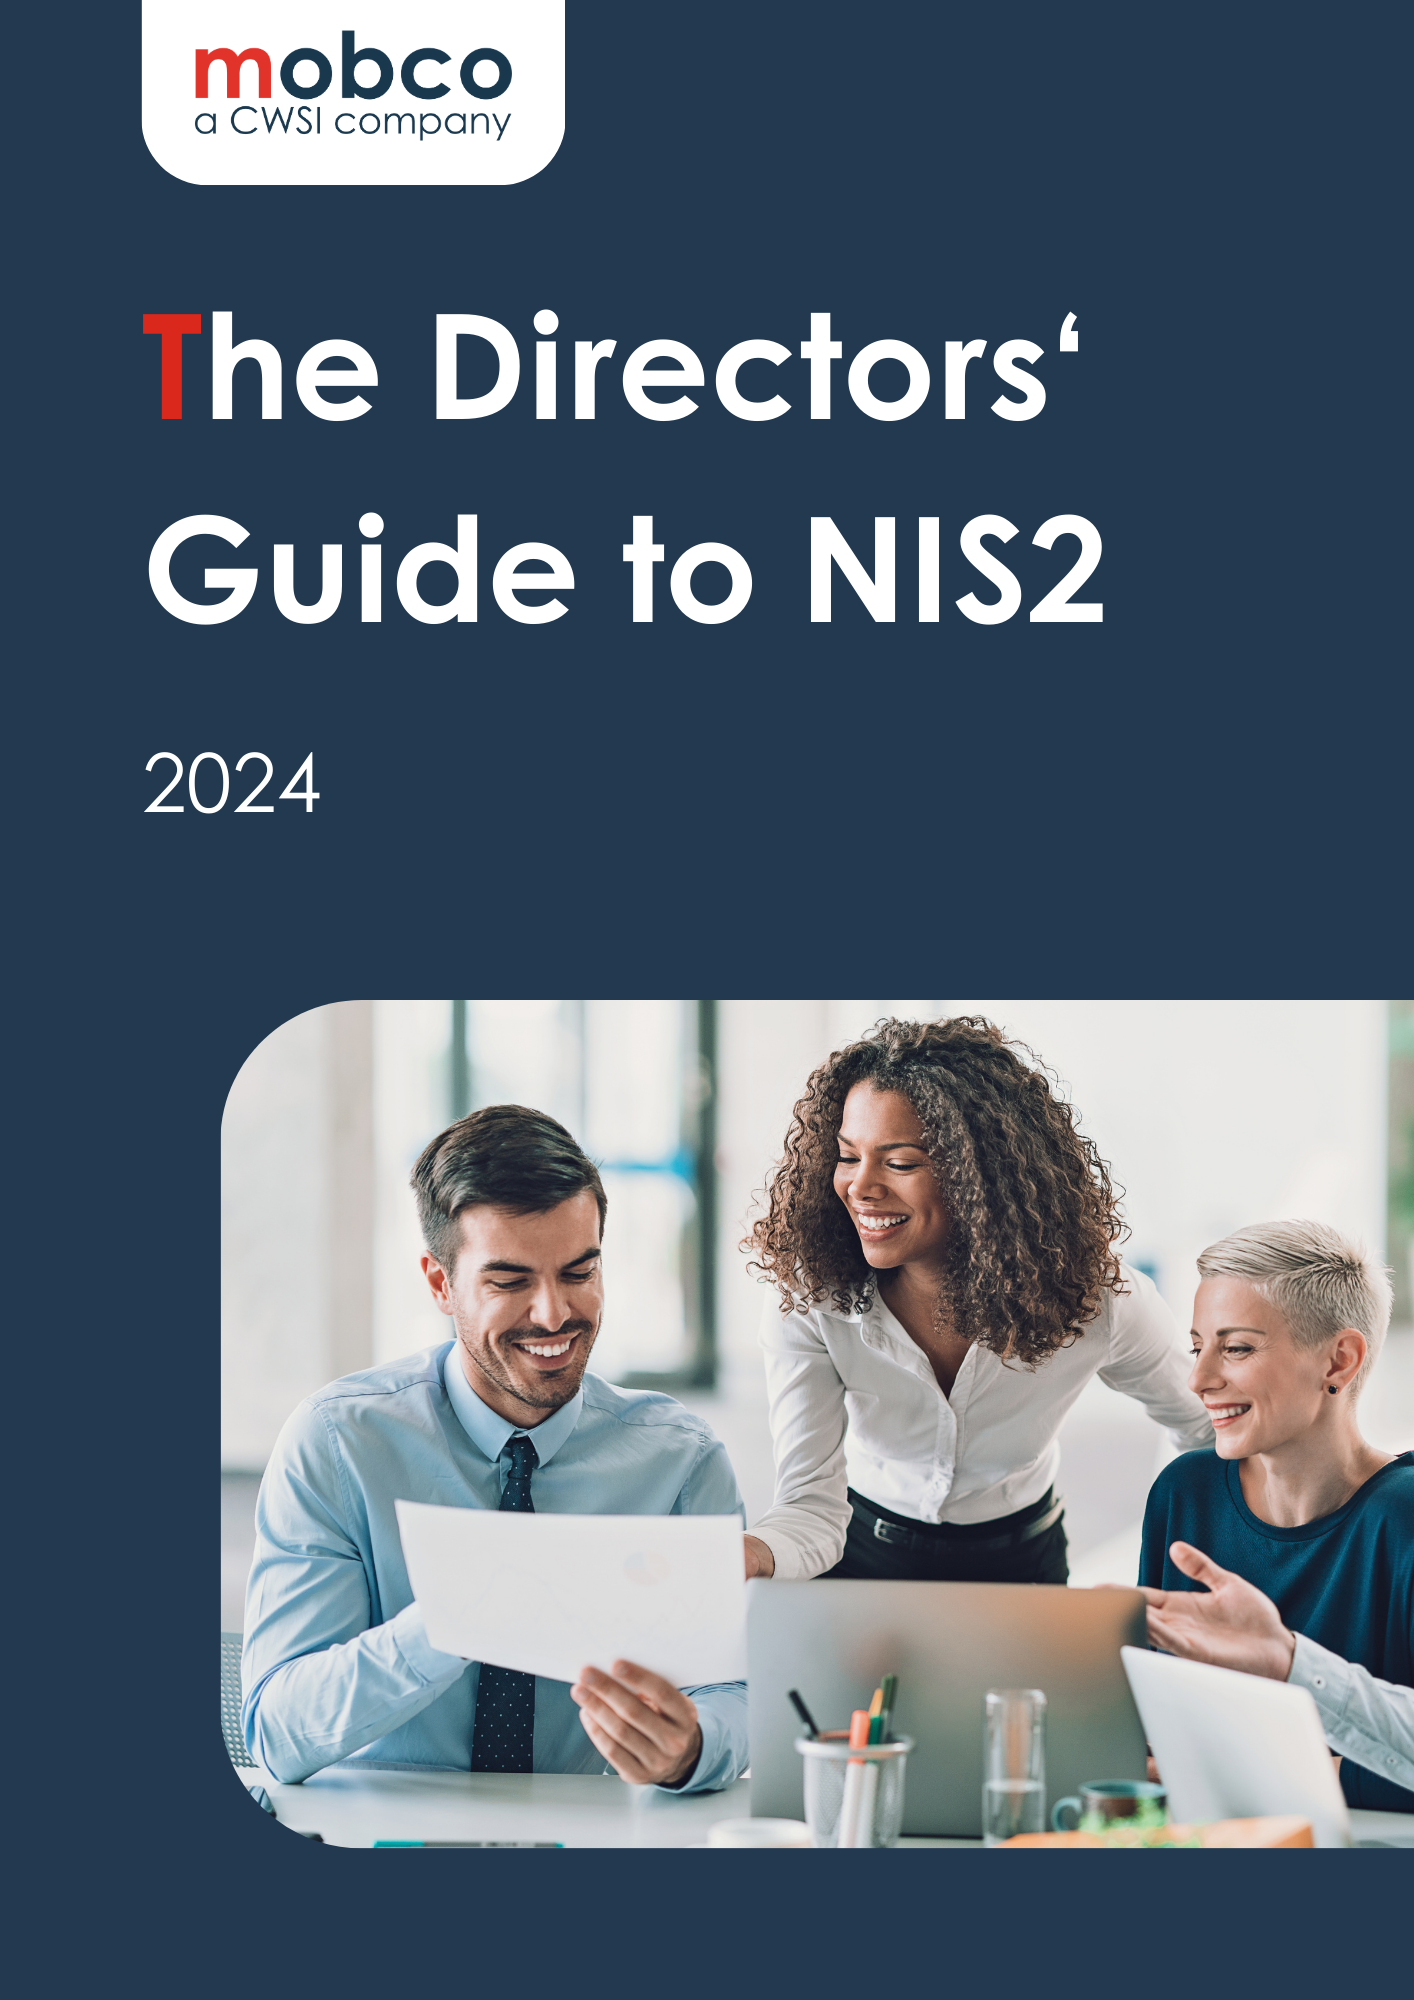 The Directors' Guide to NIS2 - mobco